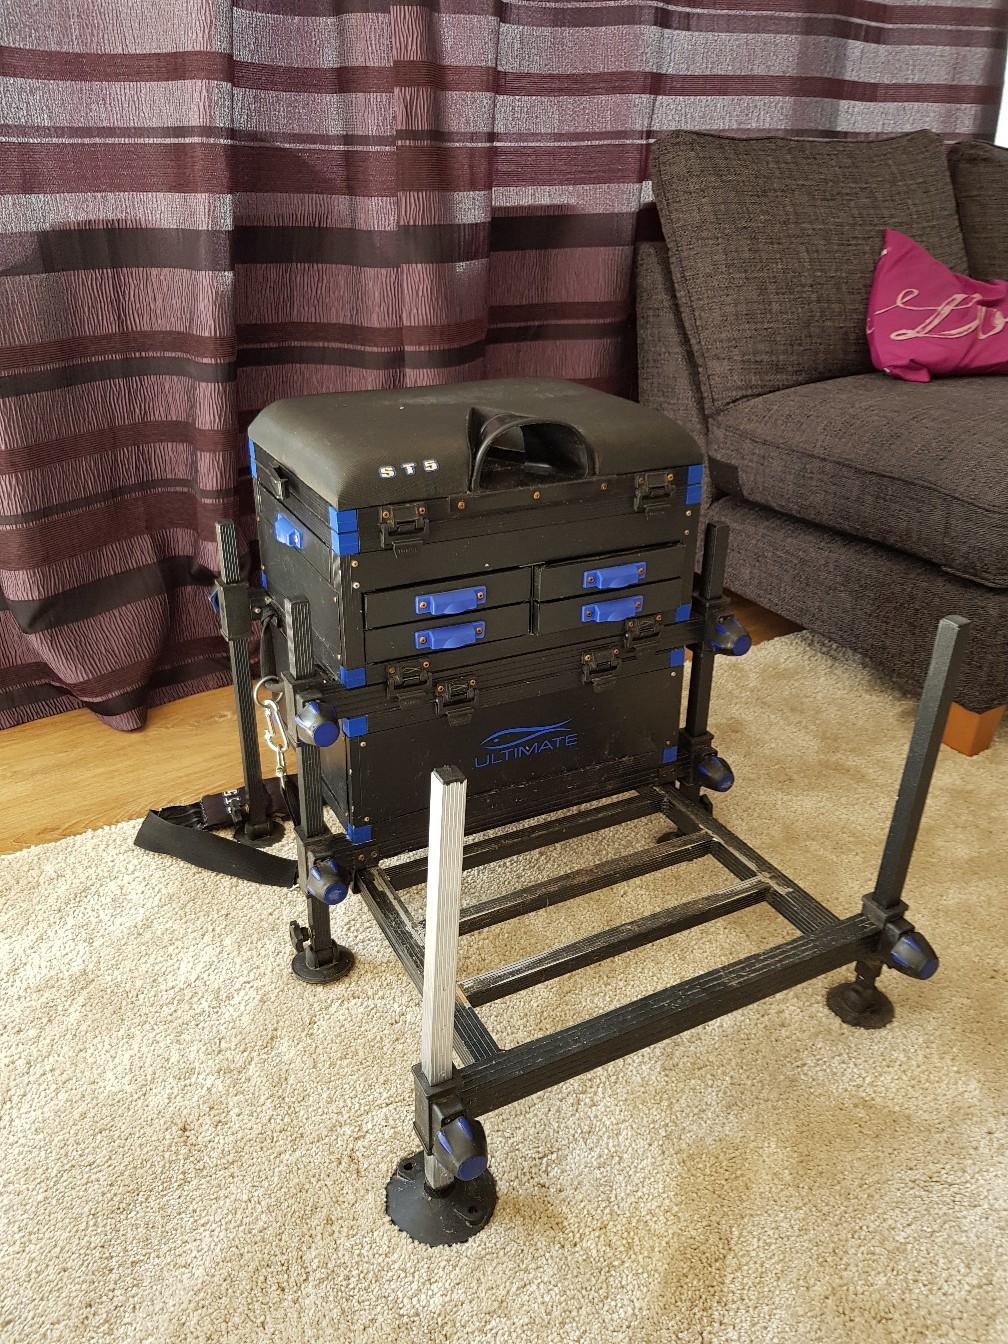 Ultimate st5 fishing box with platform in SK5 Stockport for £80.00 for sale